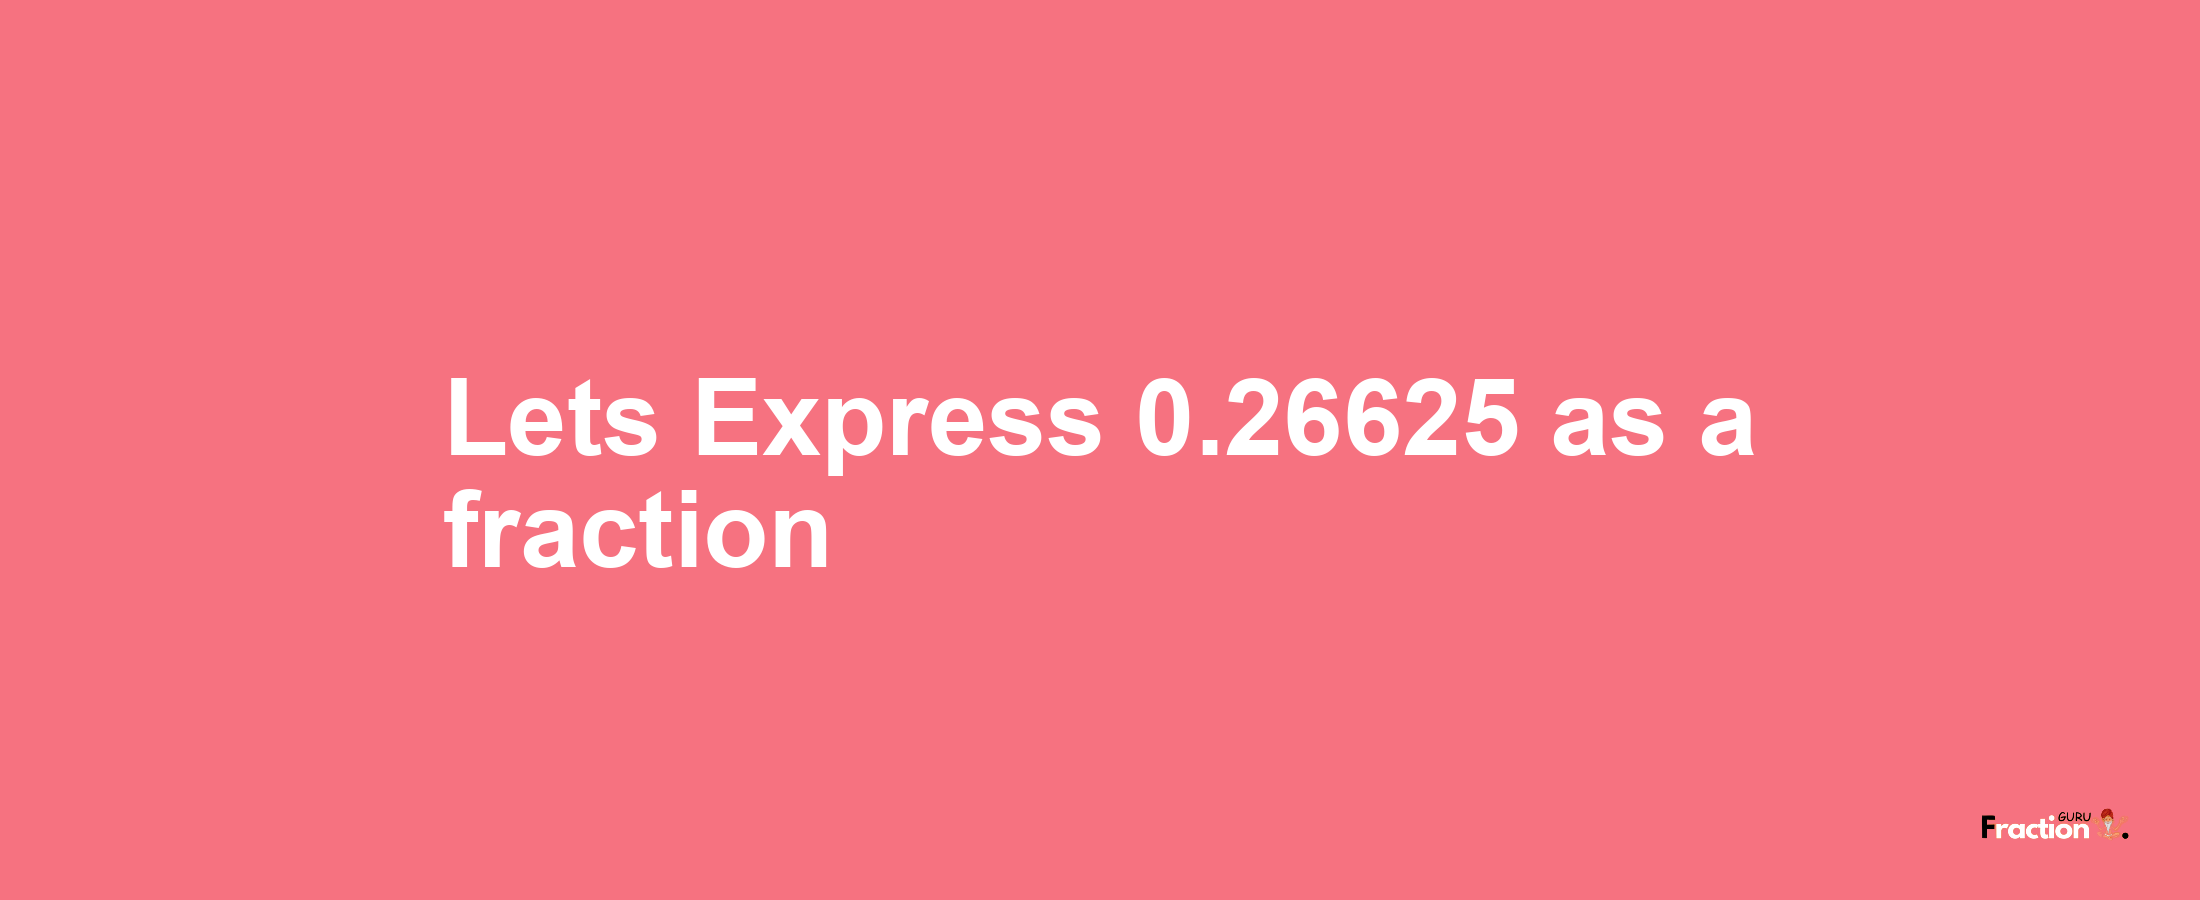 Lets Express 0.26625 as afraction